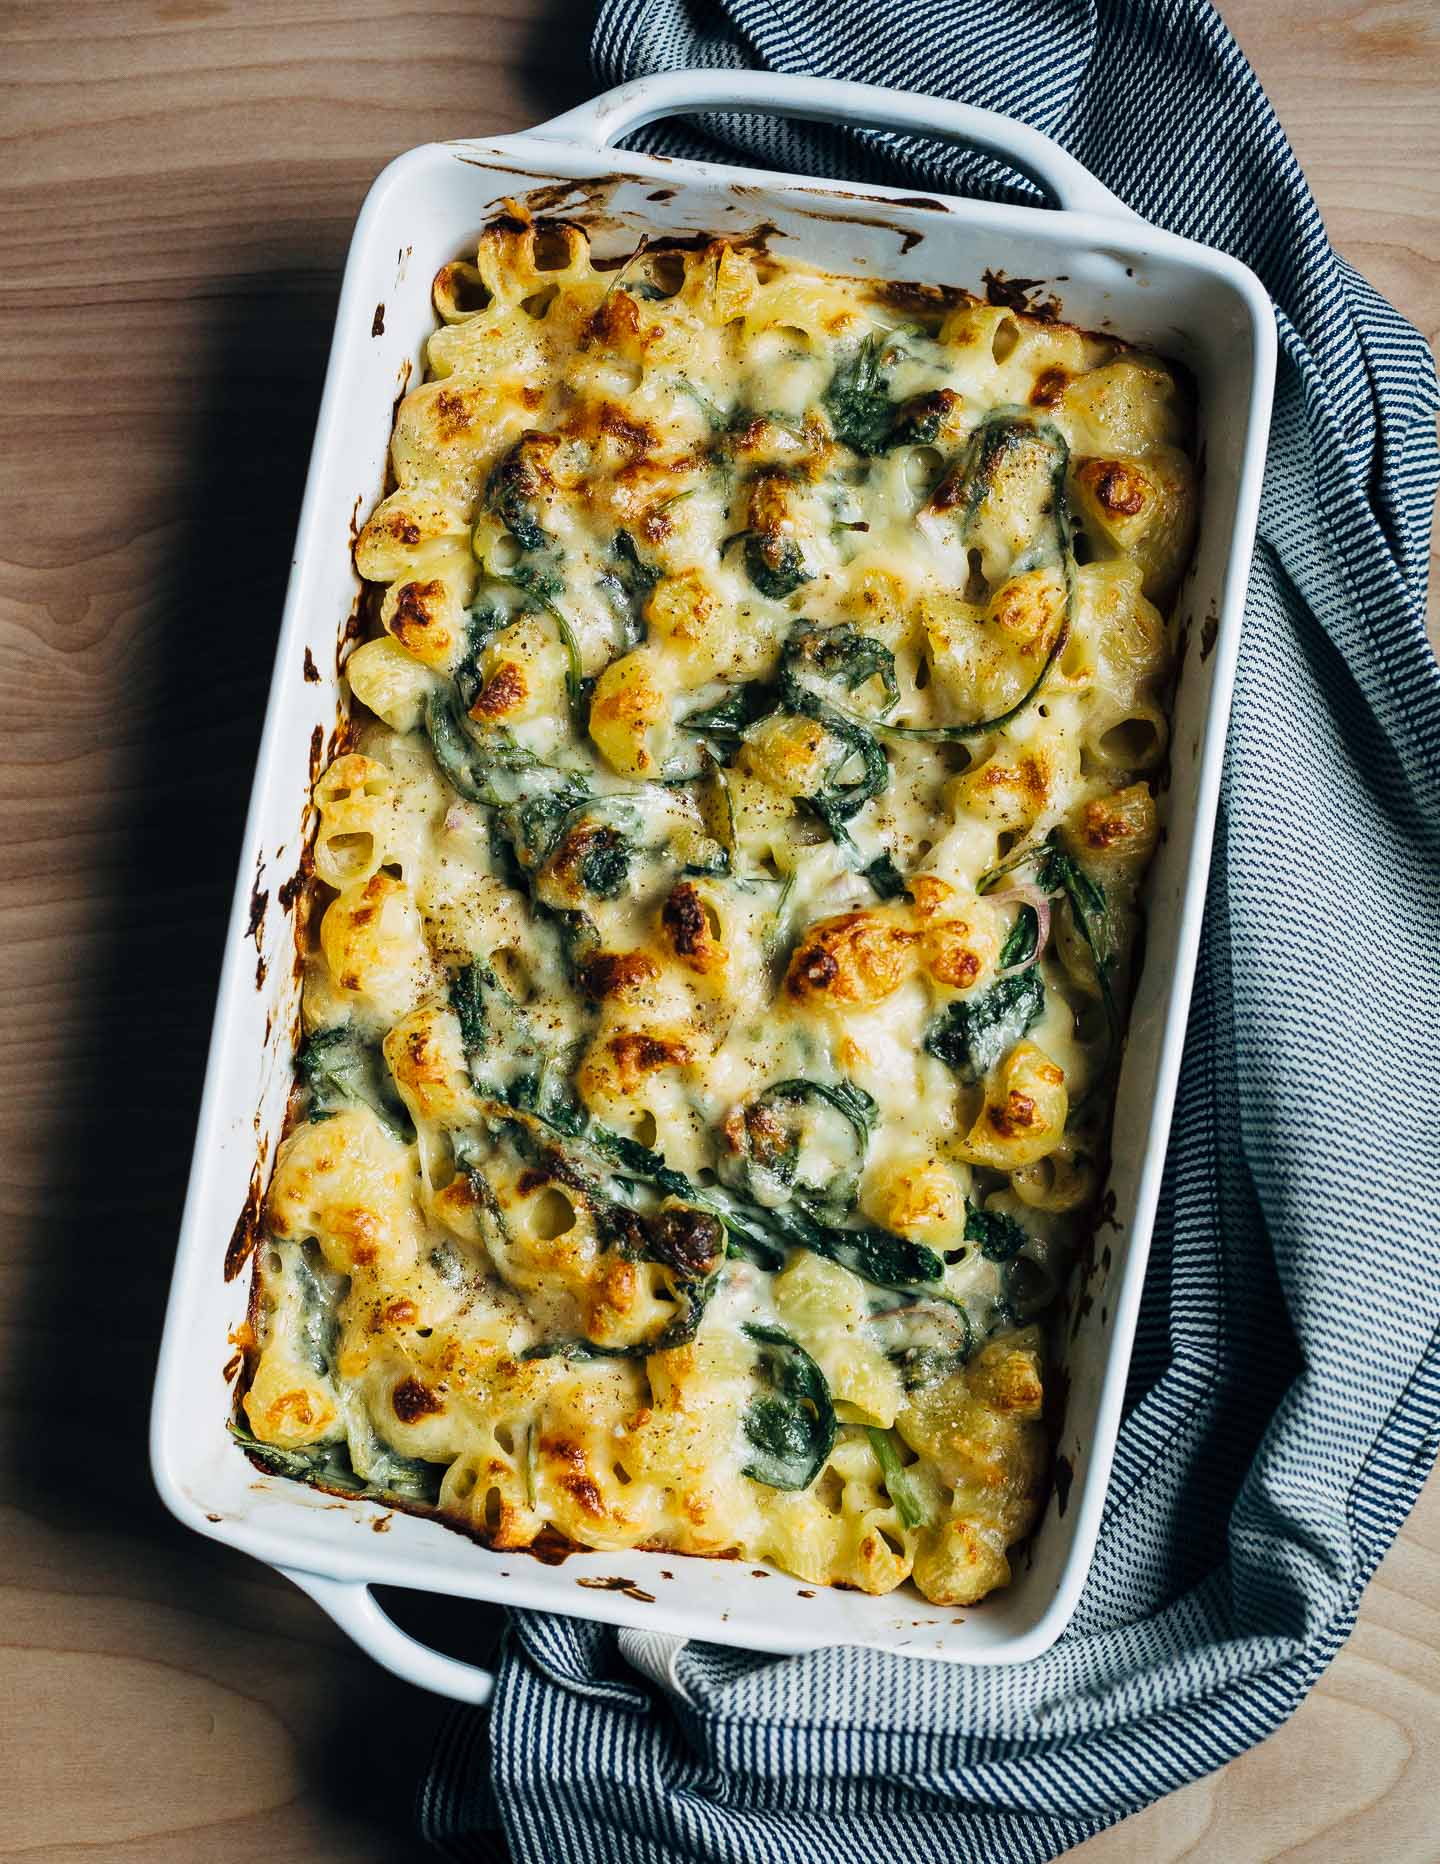 A recipe for mac and cheese with greens that makes delicious use of flavorful, but often forgotten, radish and turnip greens.